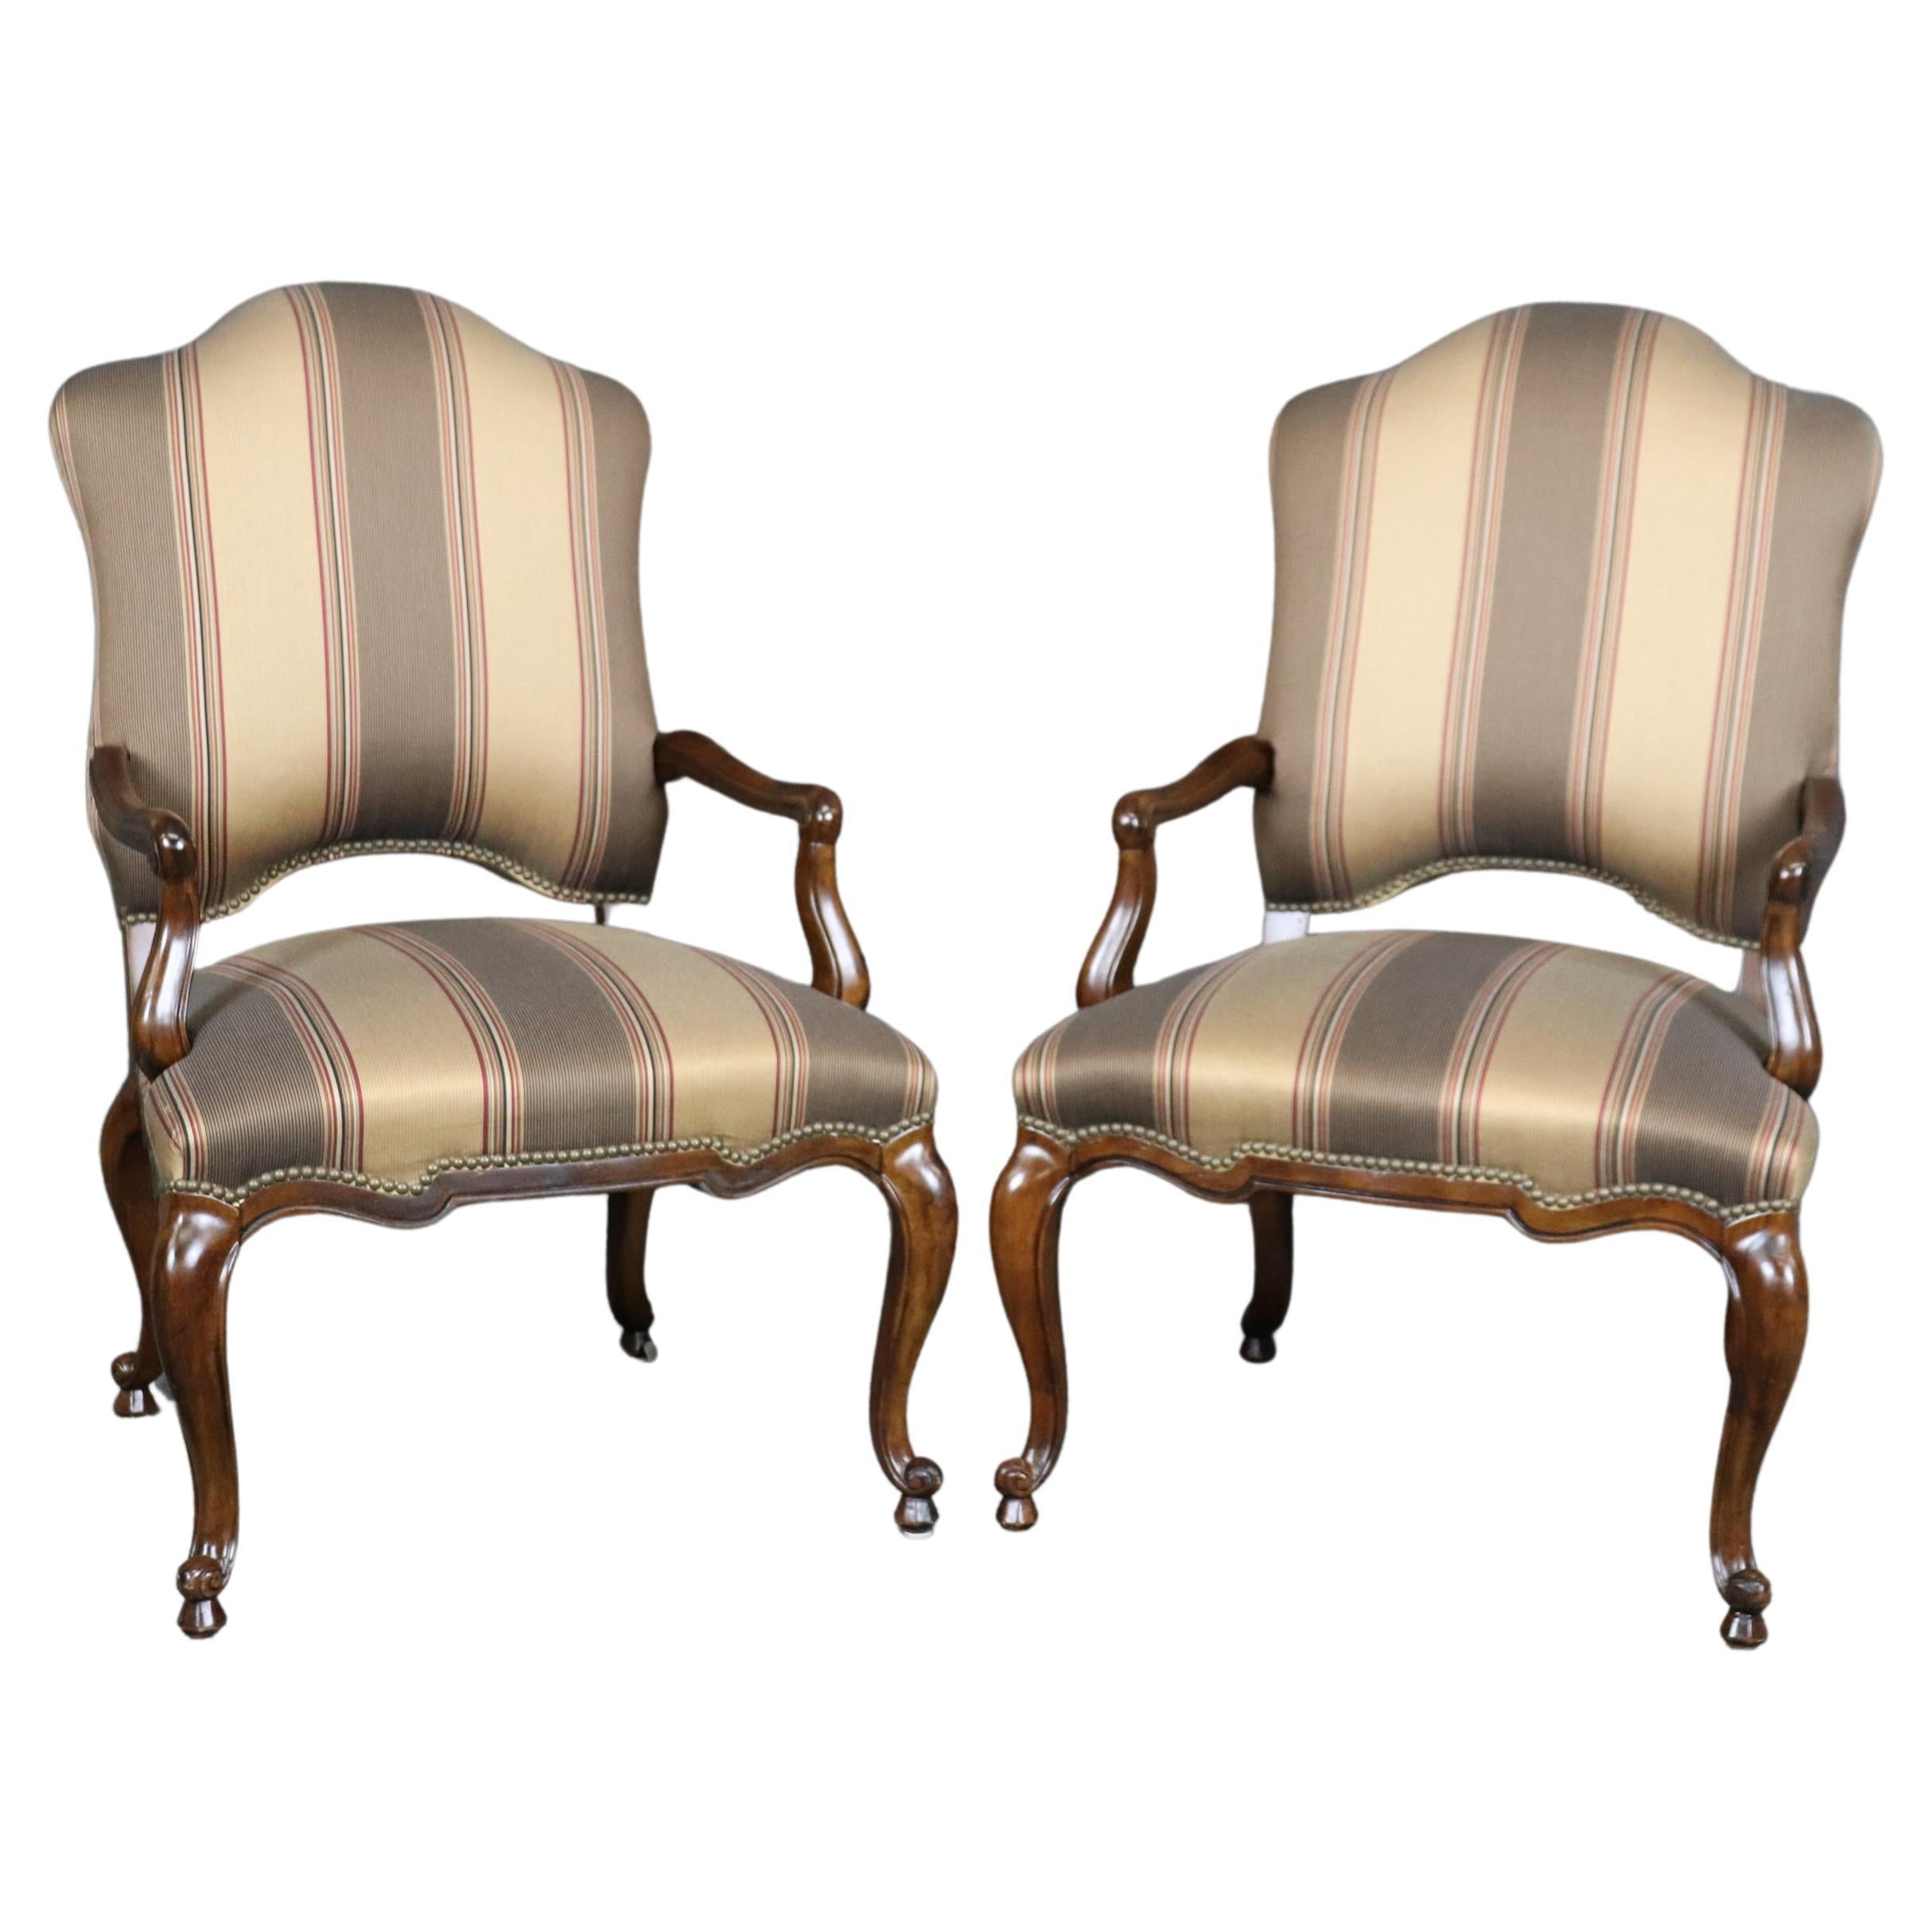 Pair of Gorgeous Century French Louis XV Walnut Armchairs Striped Upholstery For Sale